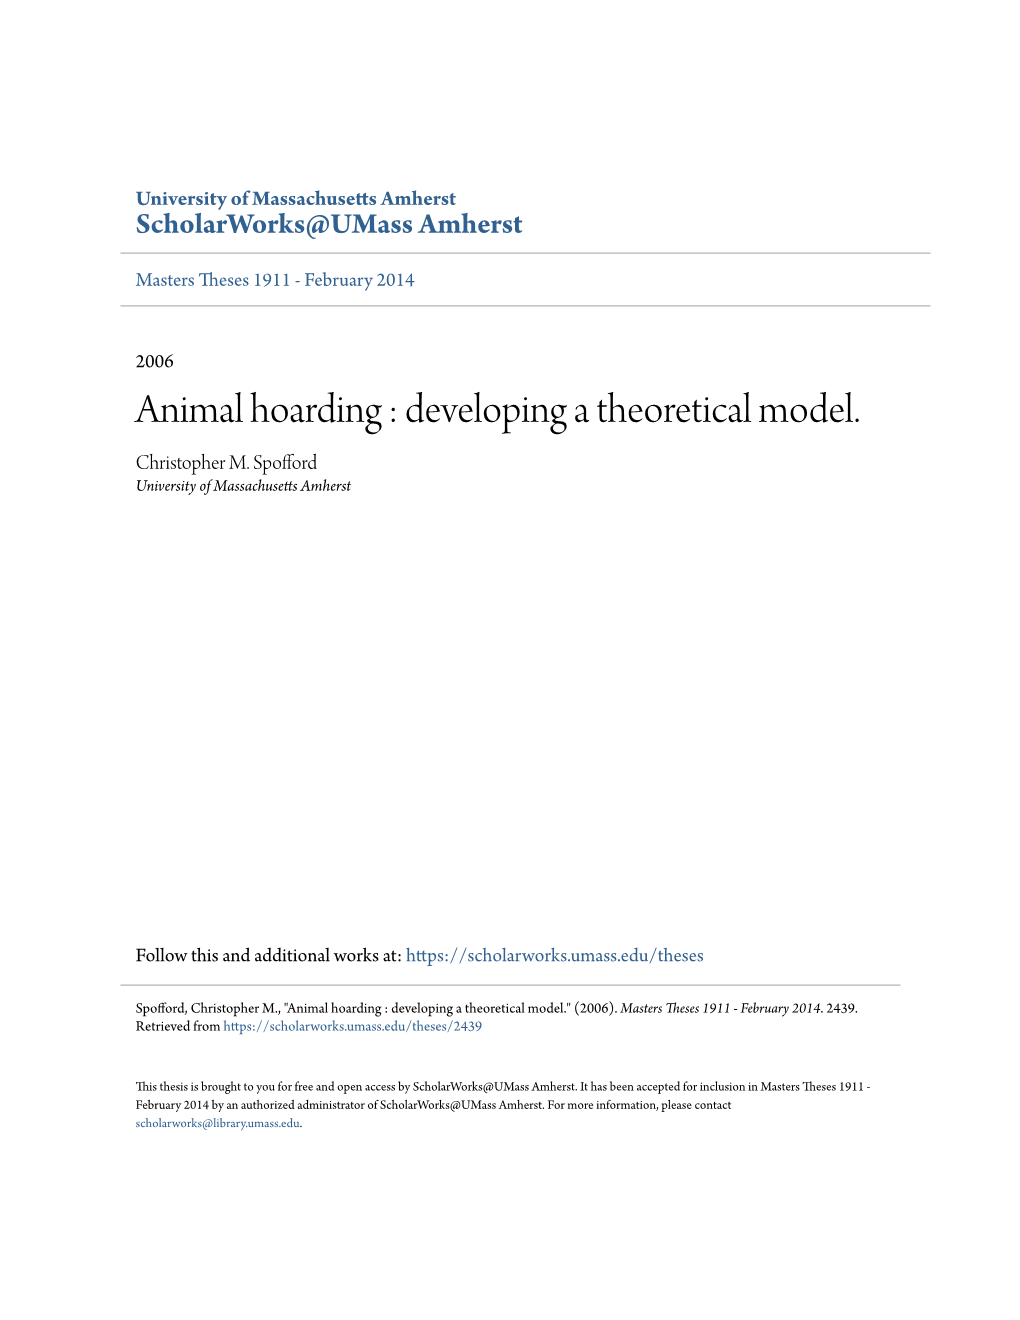 Animal Hoarding : Developing a Theoretical Model